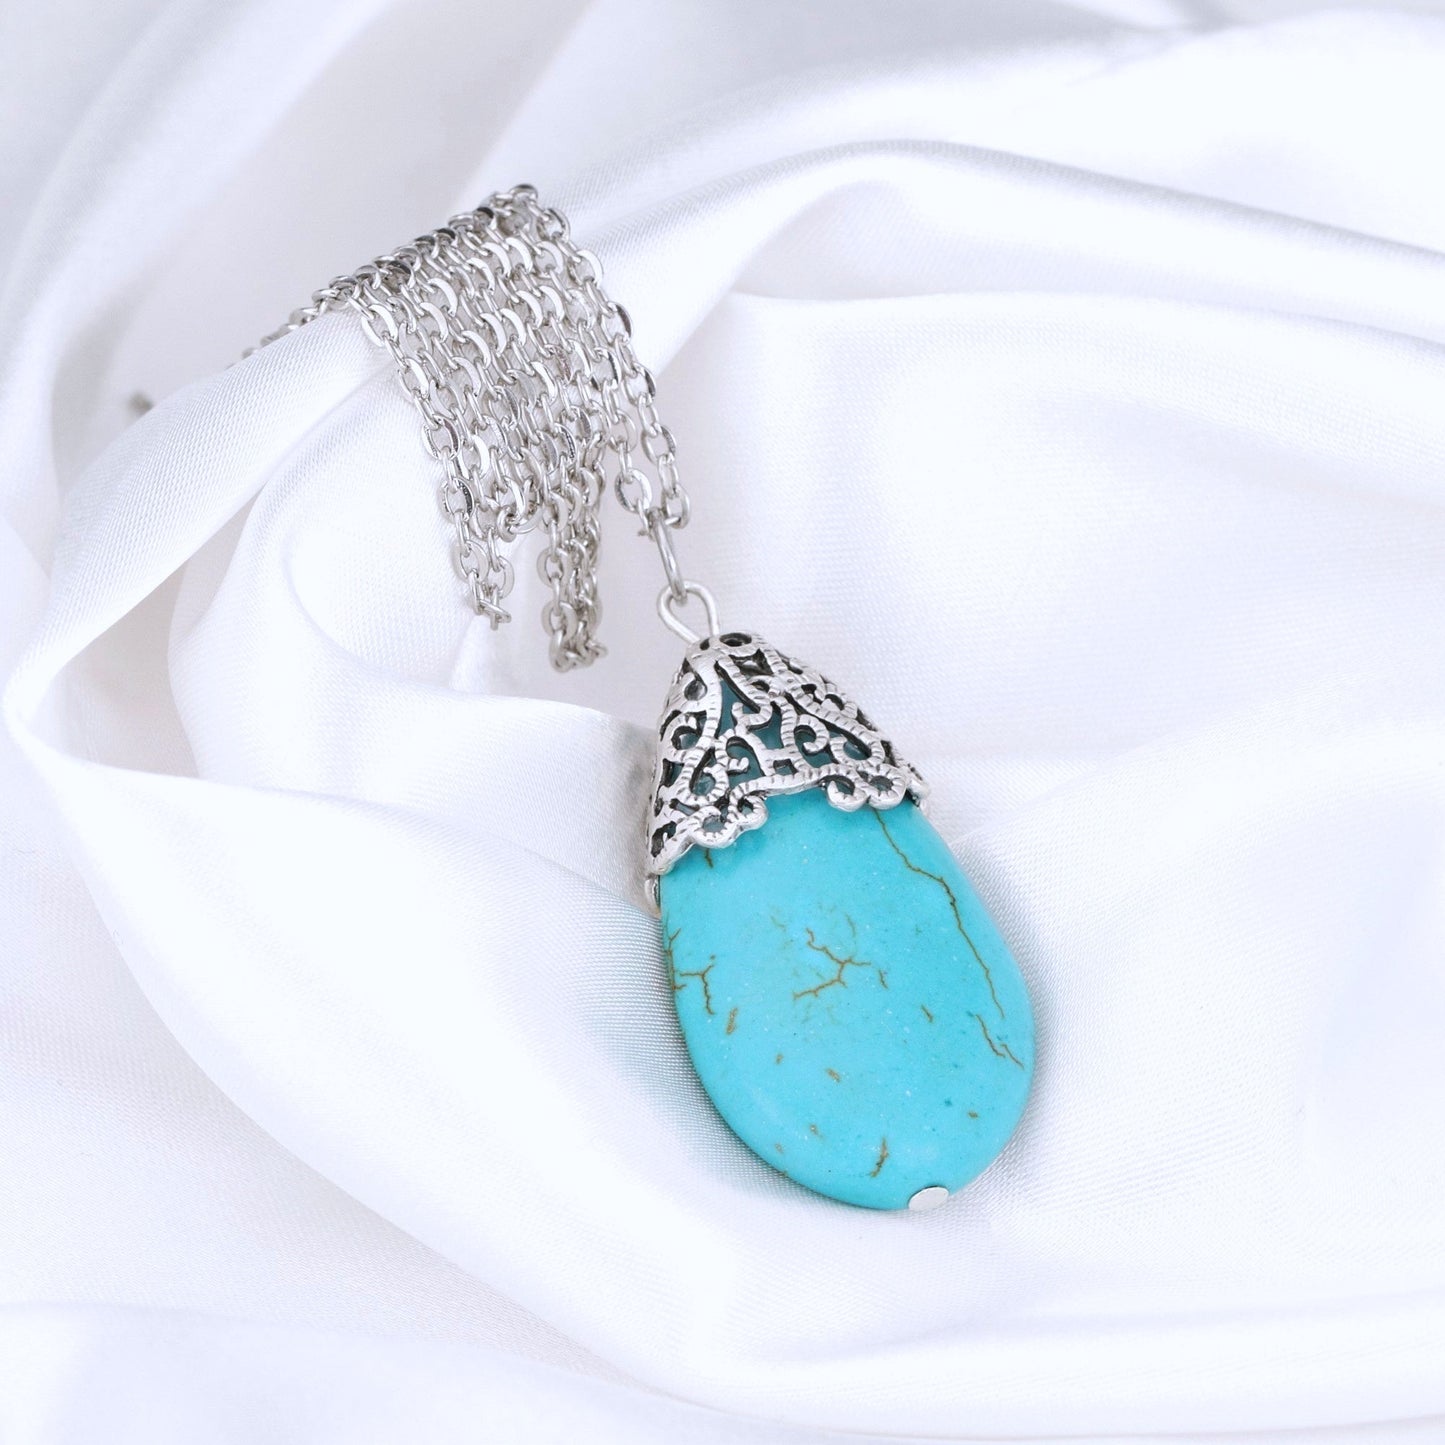 Turquoise Howlite Chain with Ornaments - VIK-106